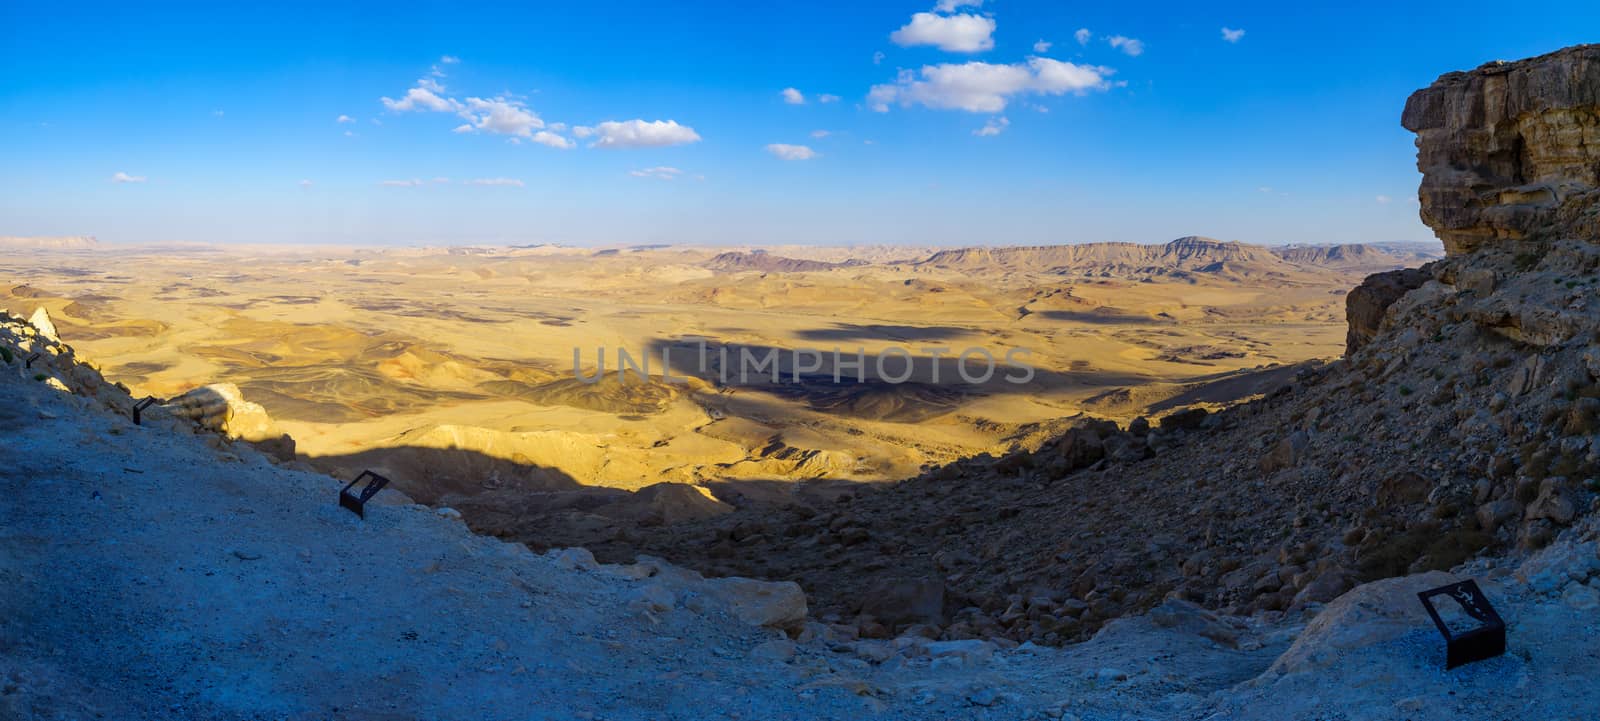 Panoramic view of cliffs and landscape in Makhtesh (crater) Ramon, the Negev Desert, Southern Israel